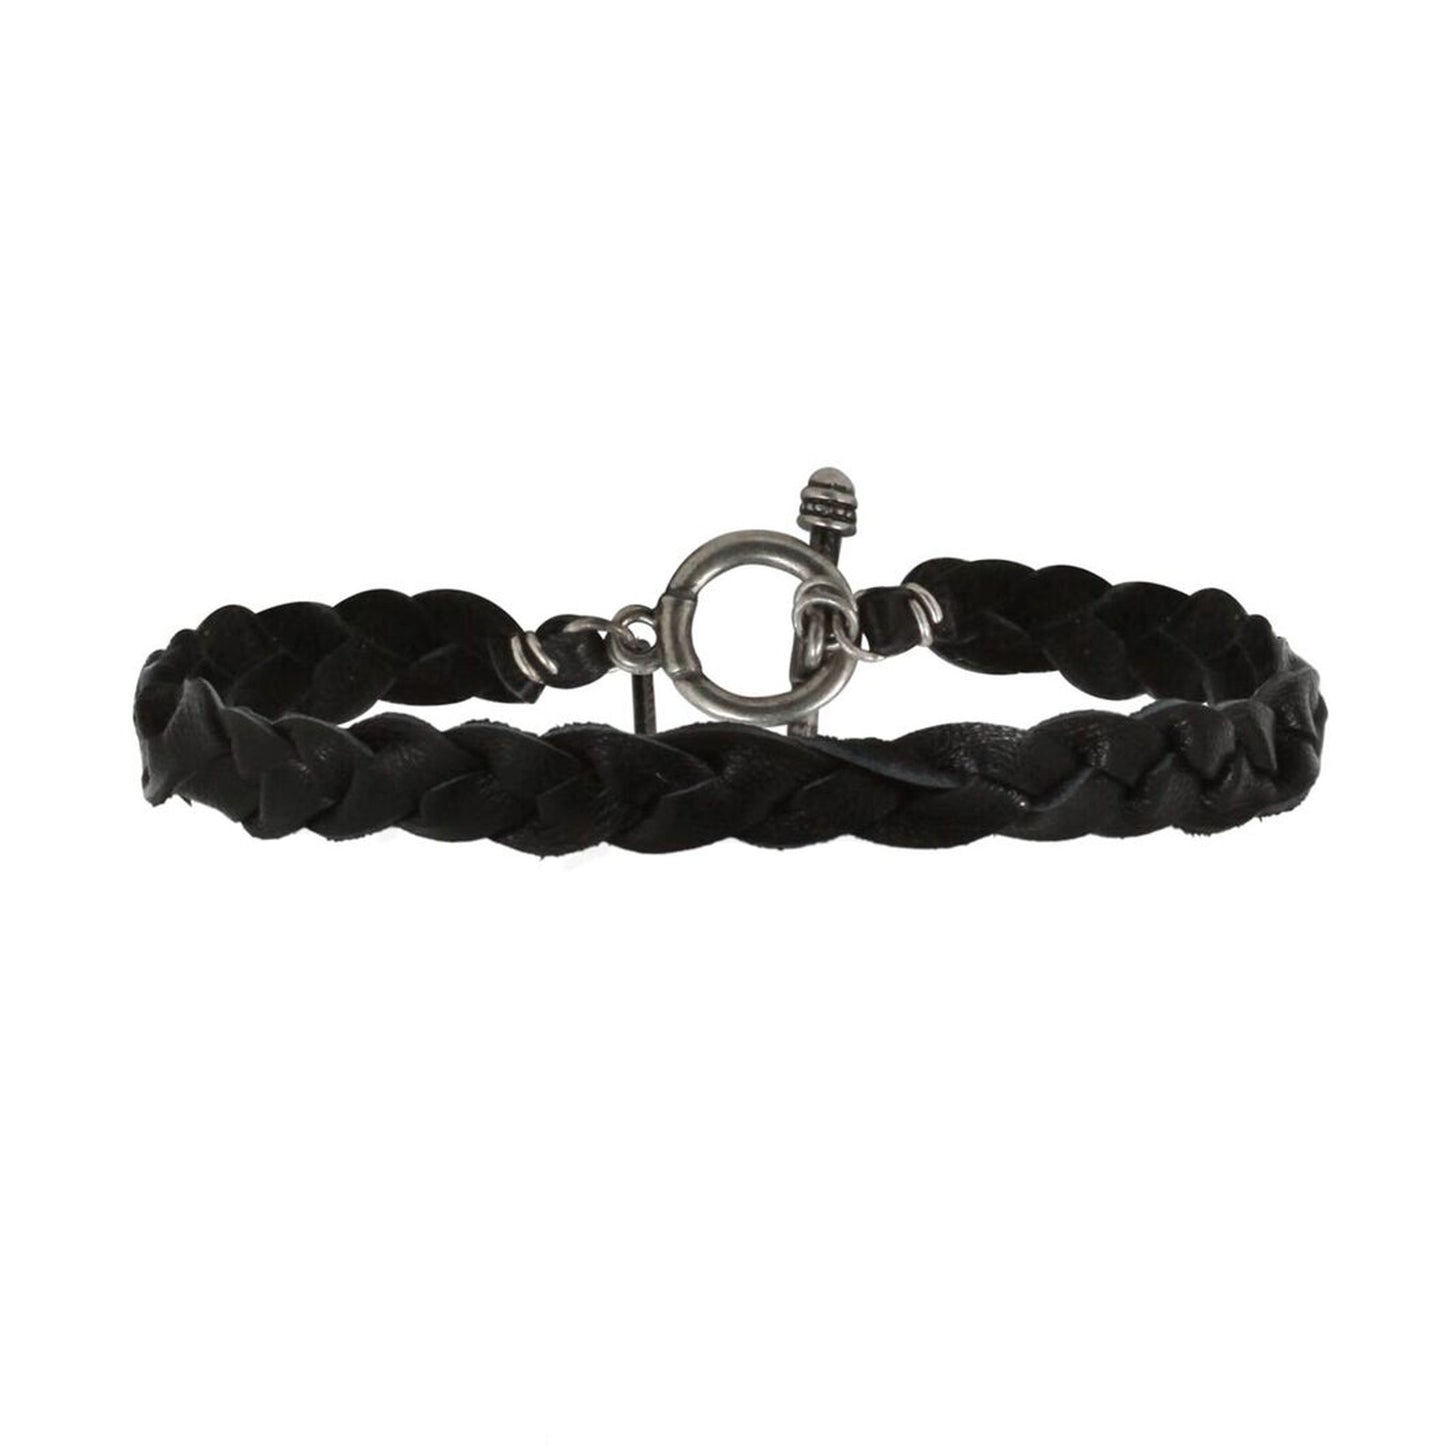 Black Leather Braided Bracelet with Silver Closure